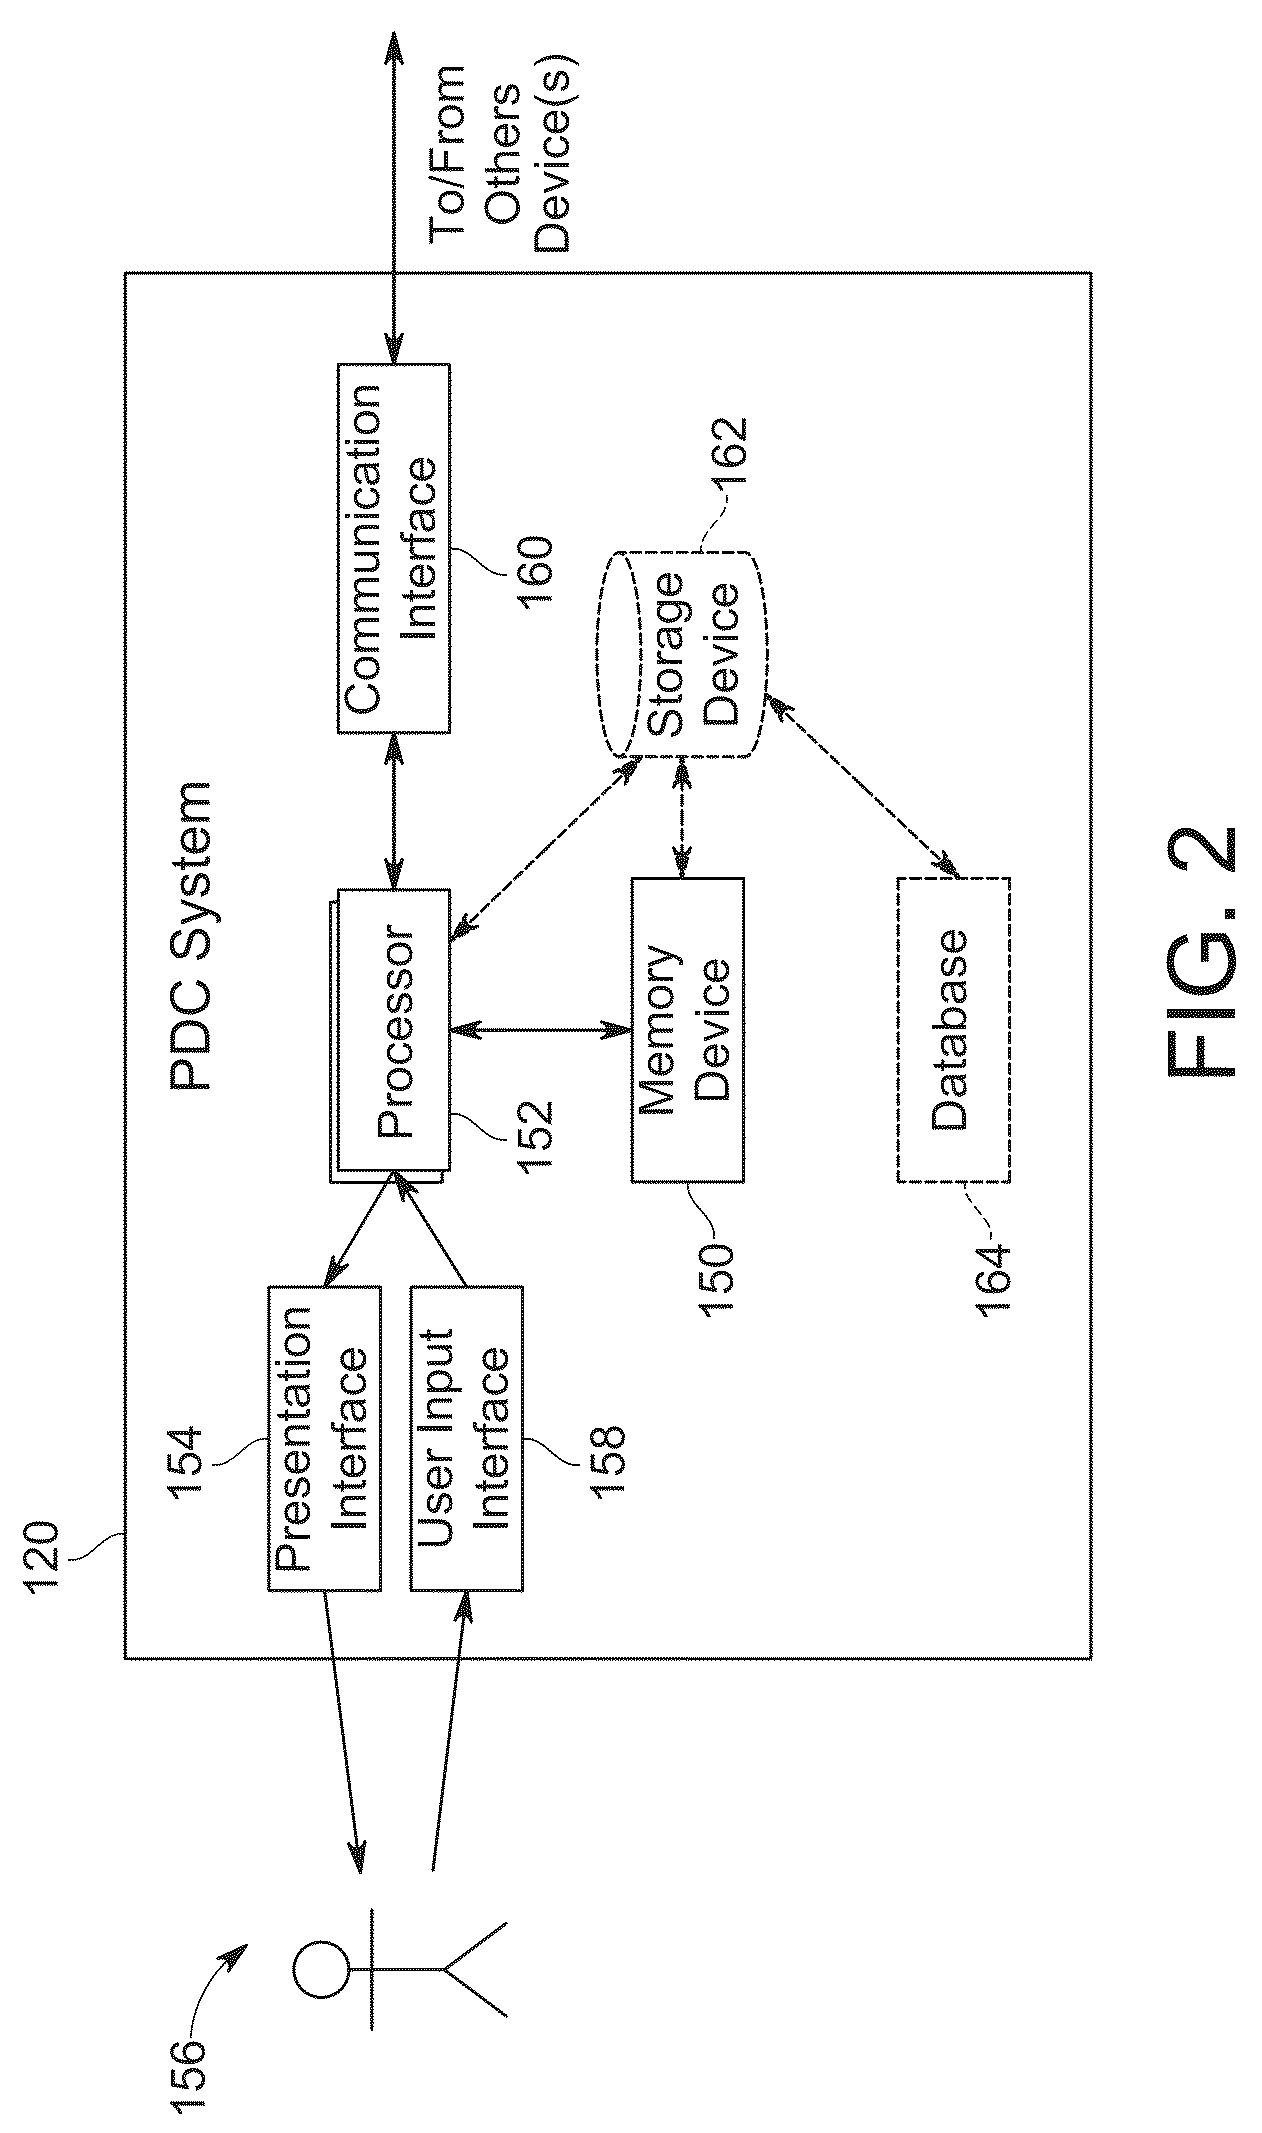 Systems and methods for detecting, correcting, and validating bad data in data streams